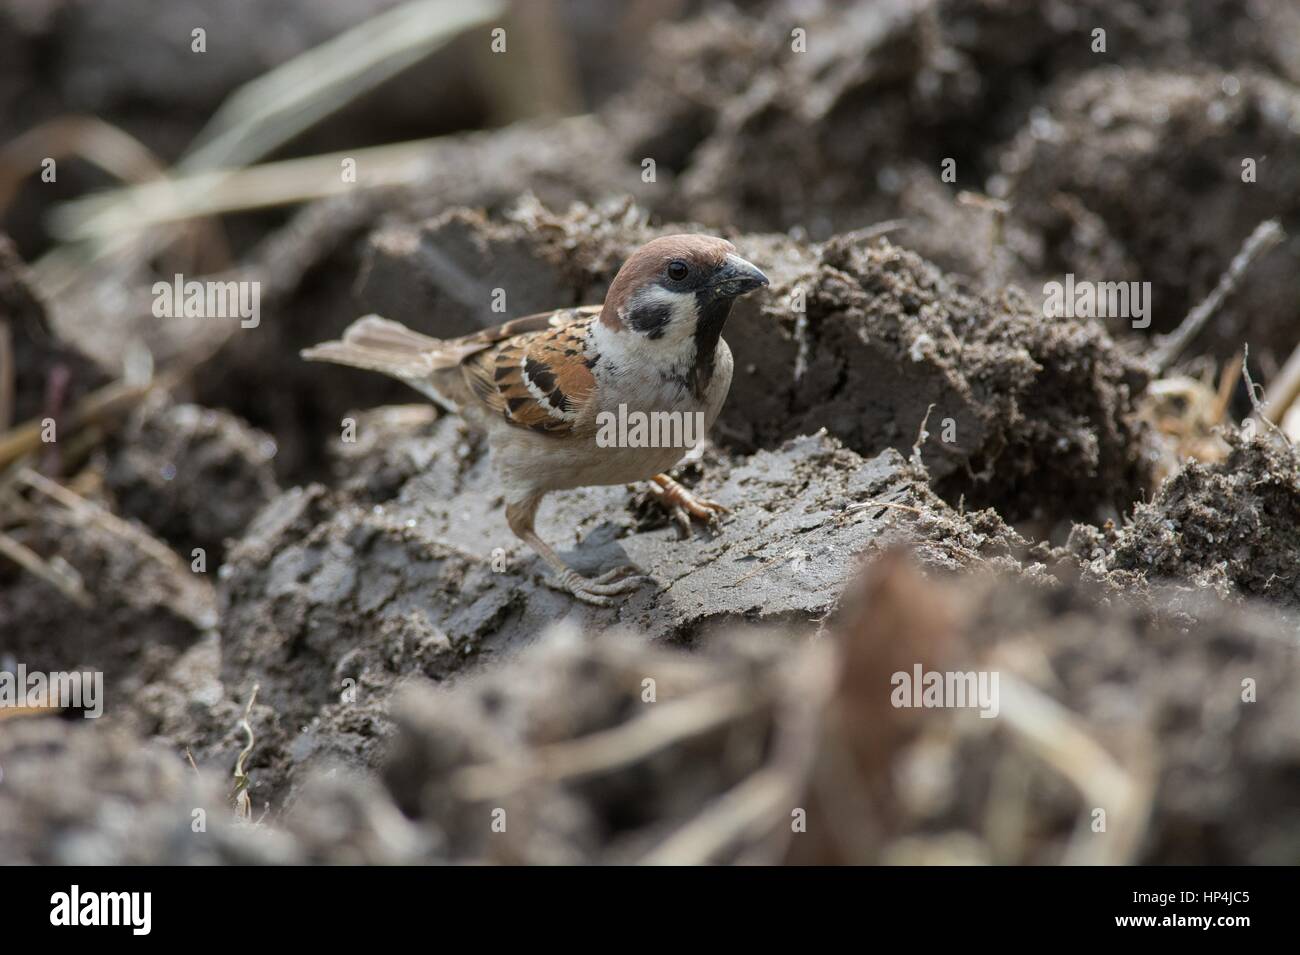 Eurasian tree sparrow - Passer montanus - foraging on the ground in ploughed field with traditional agriculture. Stock Photo